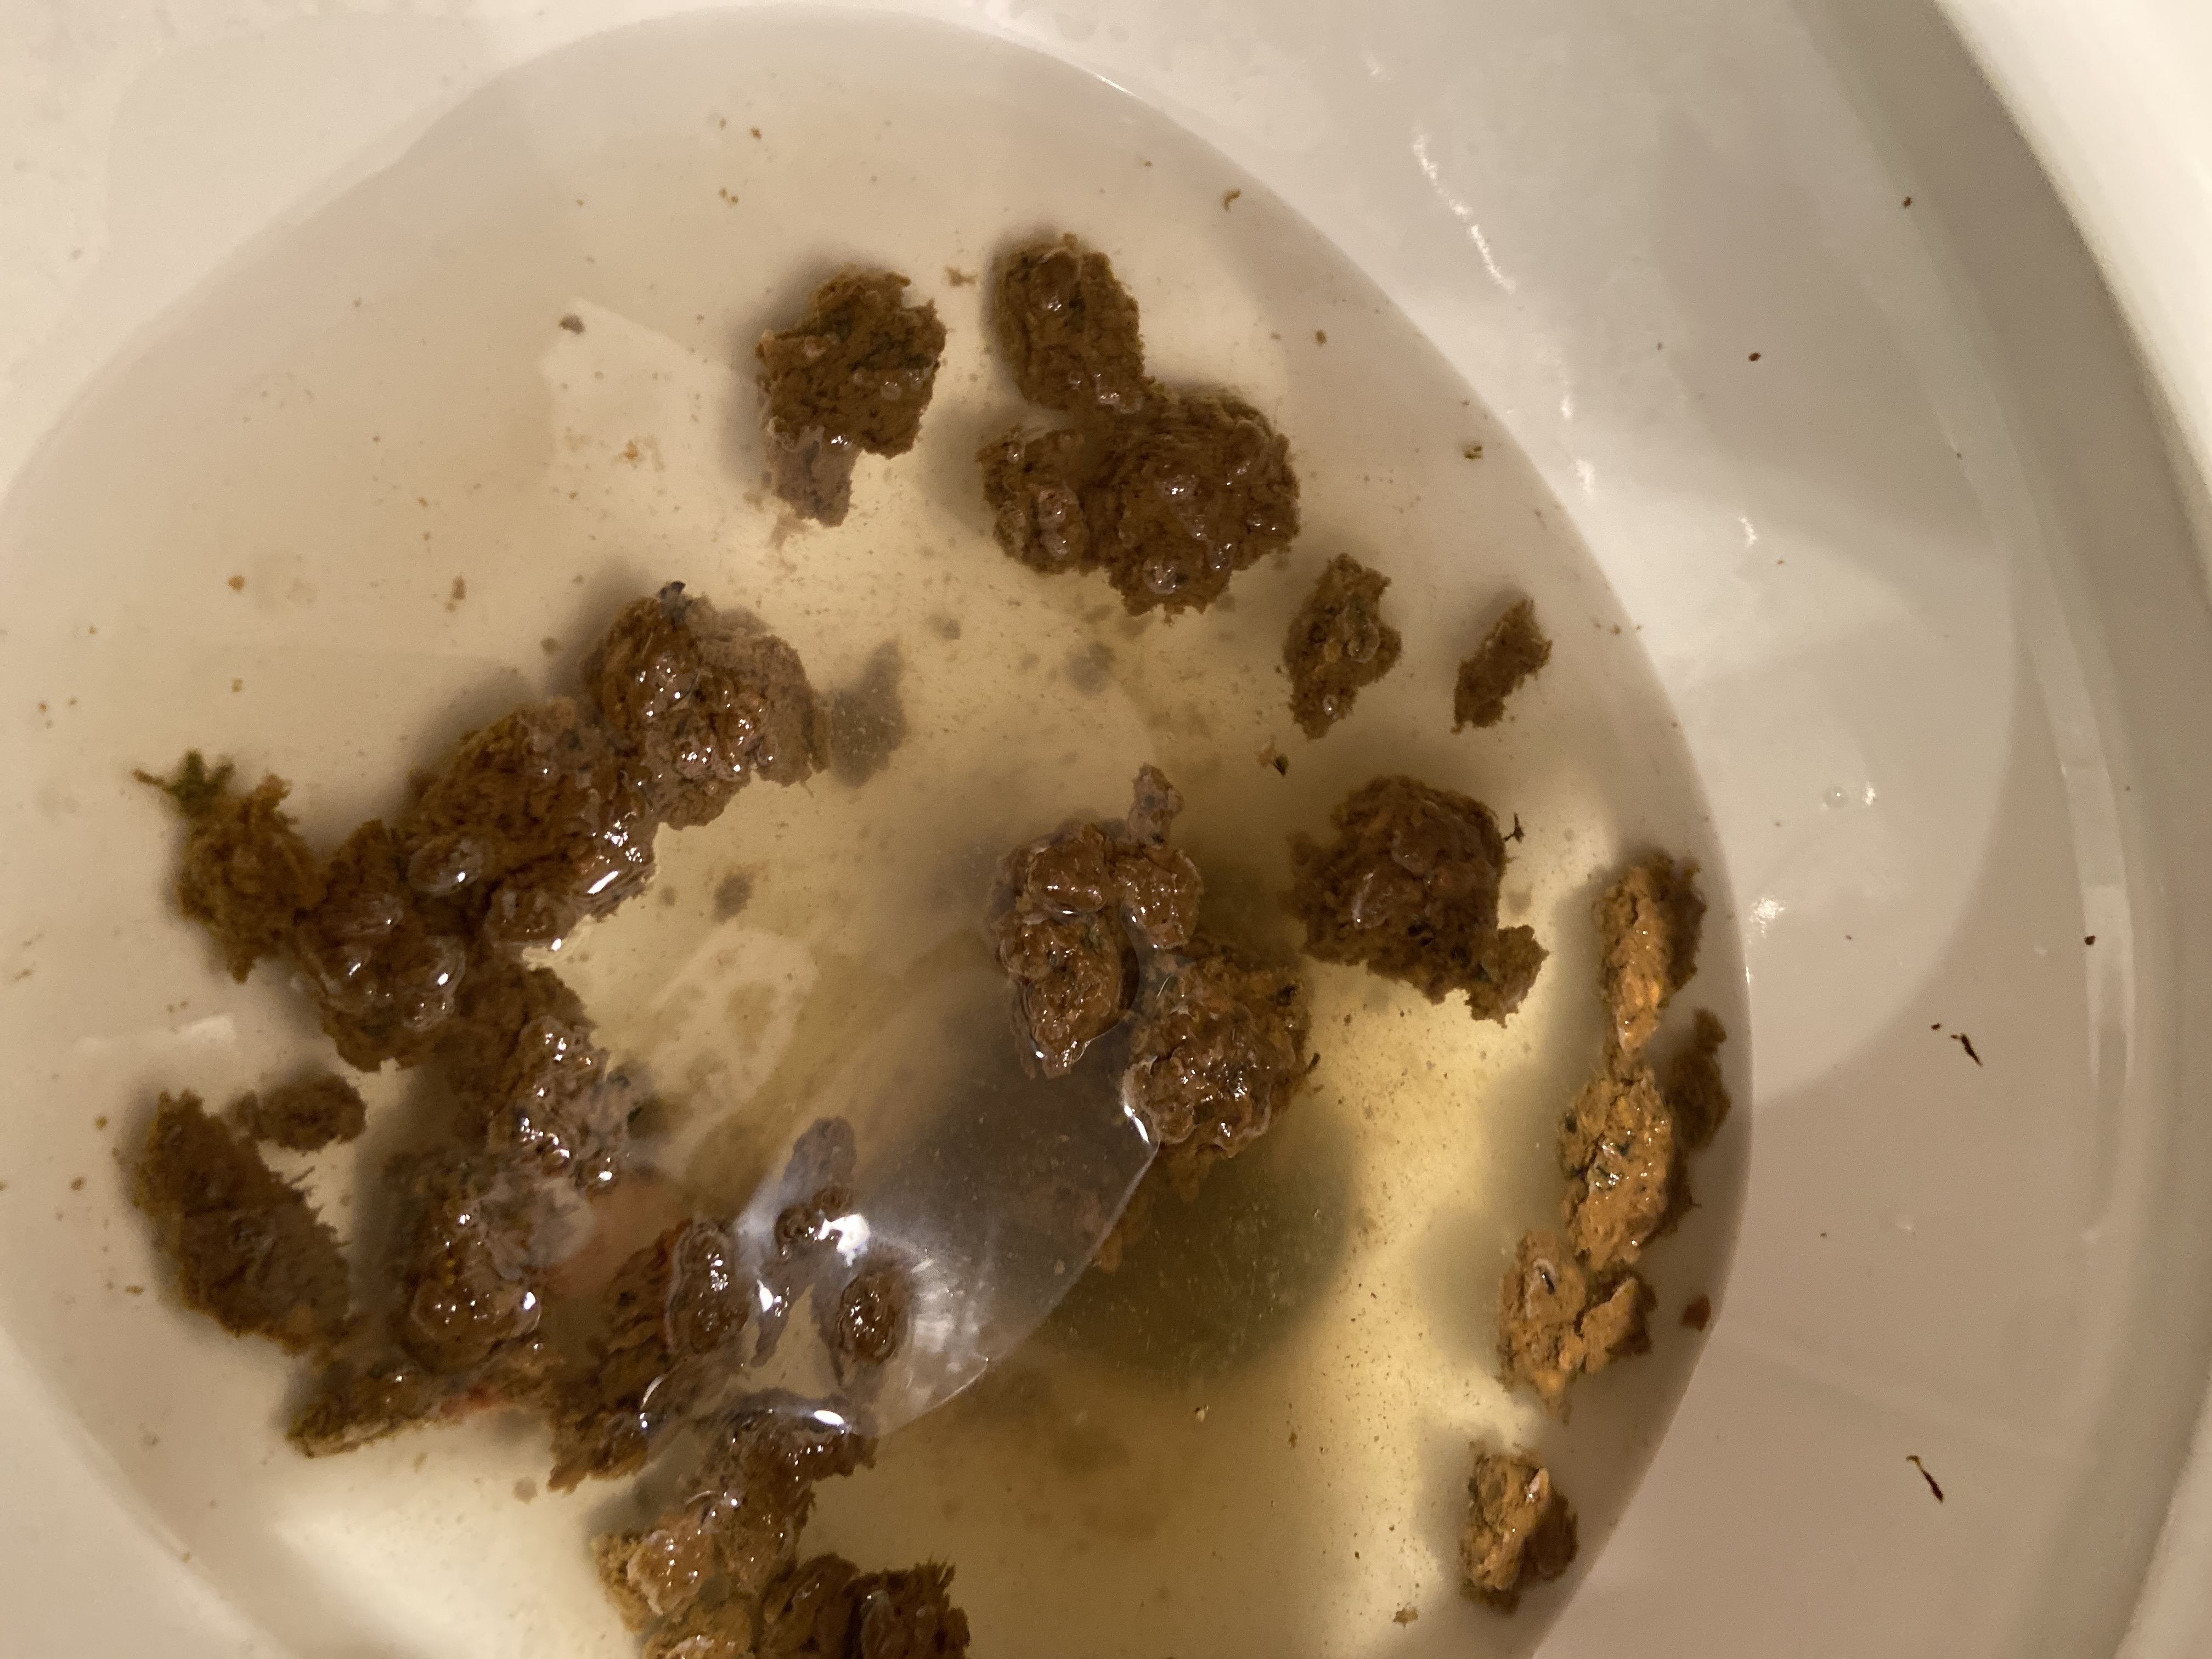 Poop after huge meal at a Mexican restaurant